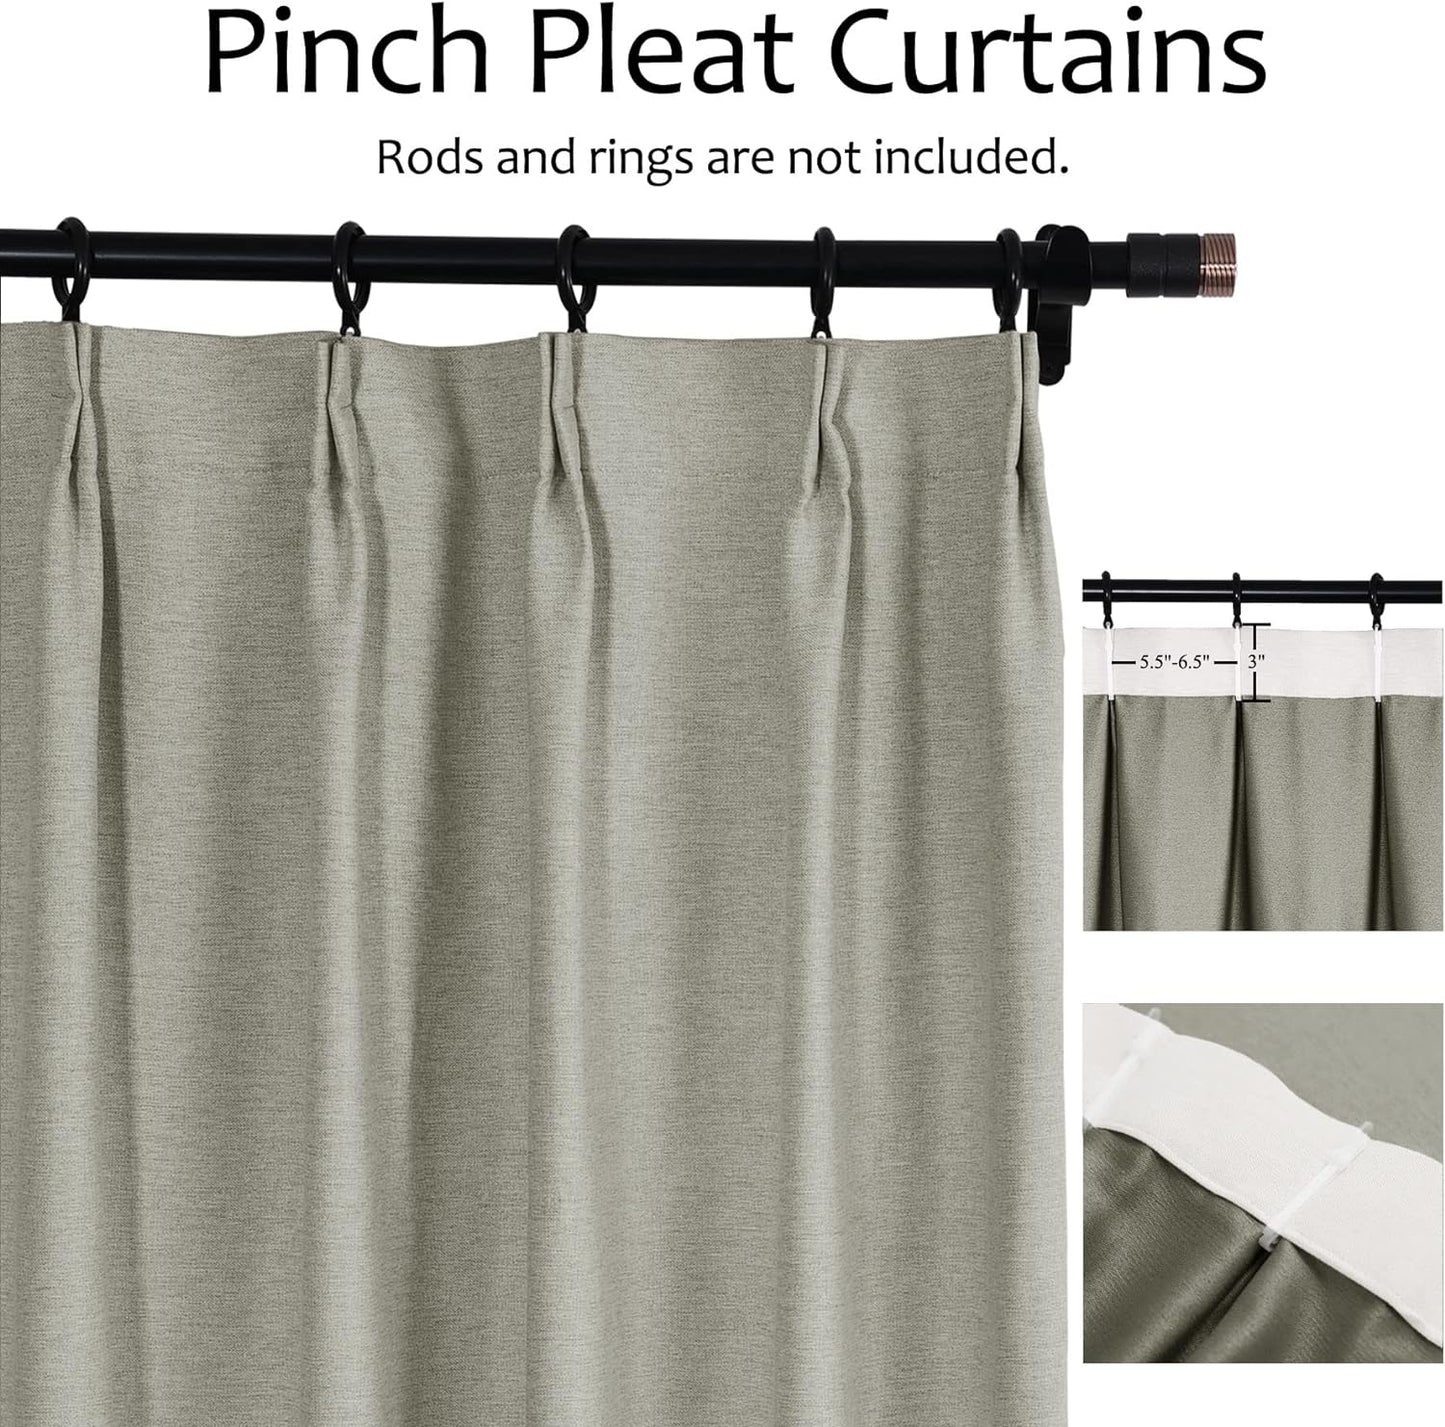 Frelement Blackout Curtains Natural Linen Curtains Pinch Pleat Drapery Panels for Living Room Thermal Insulated Curtains, 52" W X 63" L, 2 Panels, Oasis  Frelement   